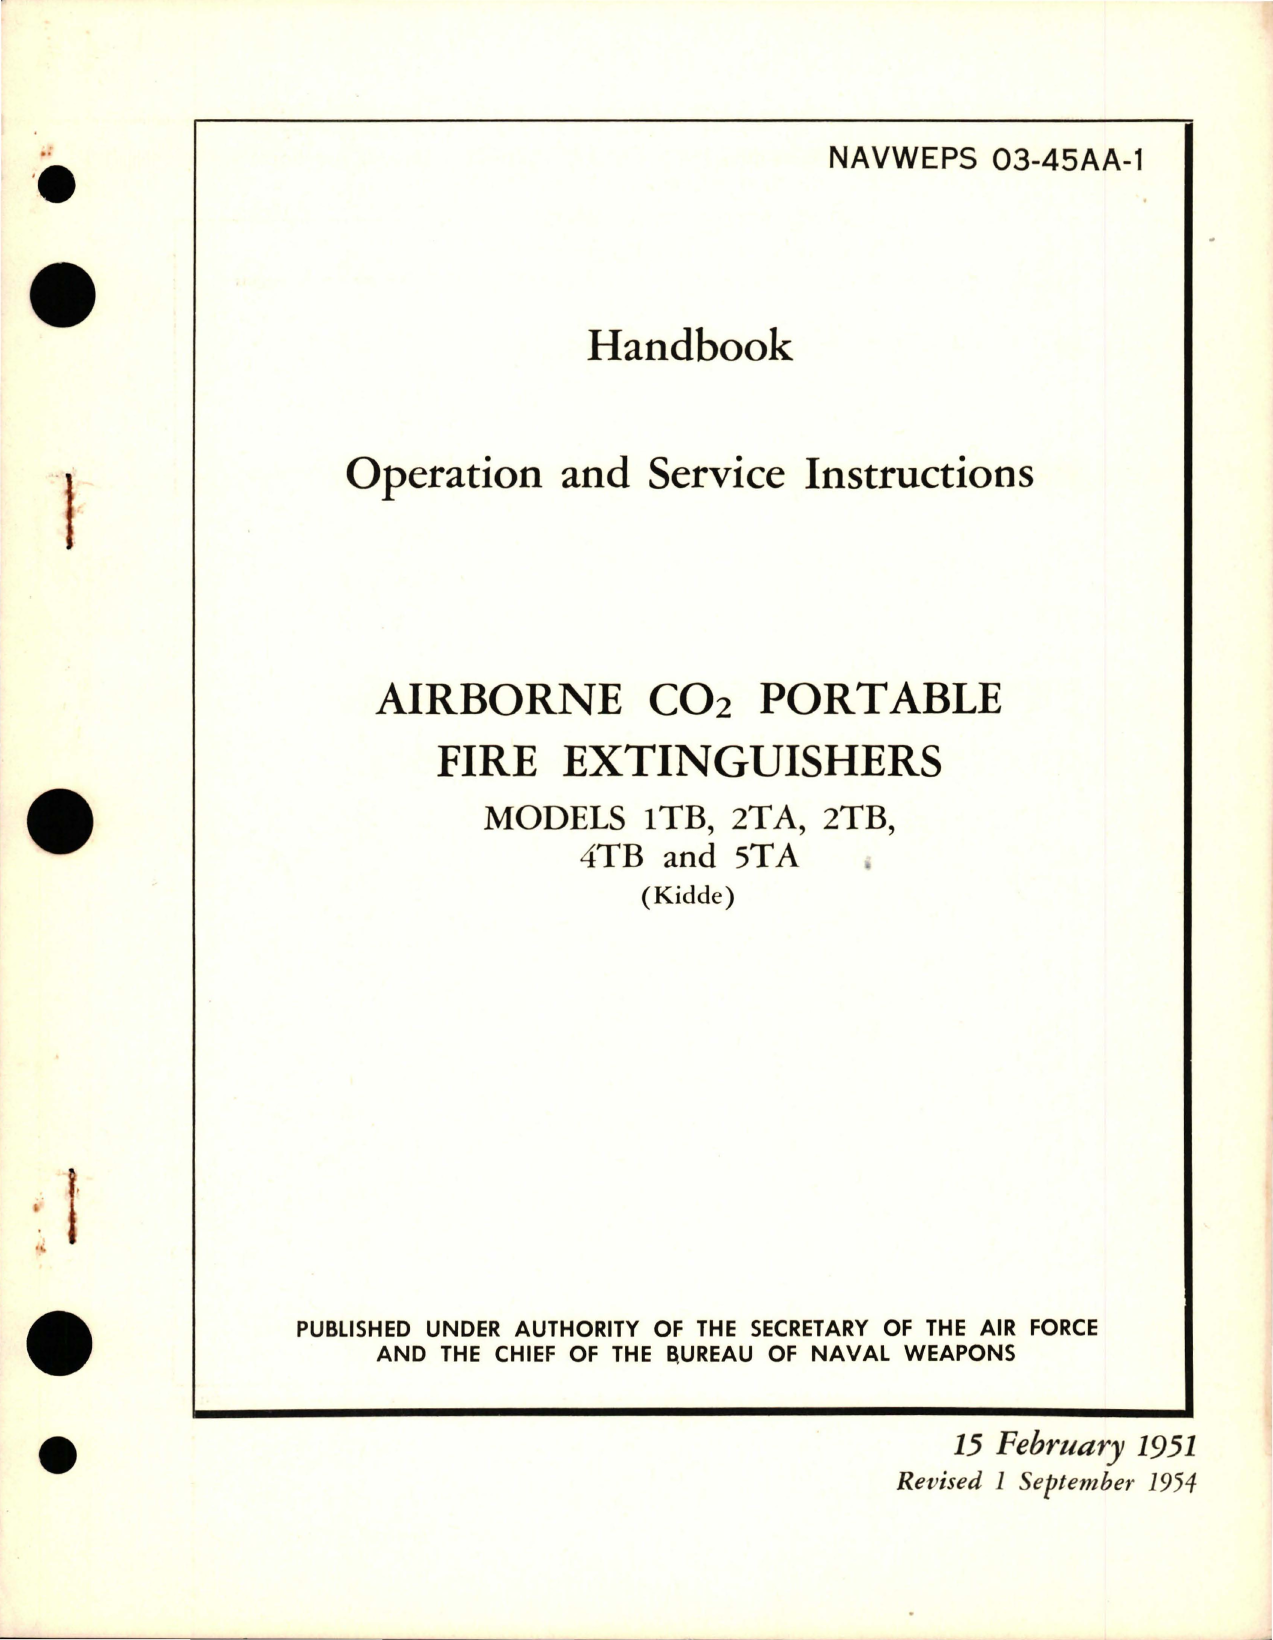 Sample page 1 from AirCorps Library document: Operation and Service Instructions for Airborne CO2 Portable Fire Extinguishers - Models 1TB, 2TA, 2TB, 4TB, and 5TA